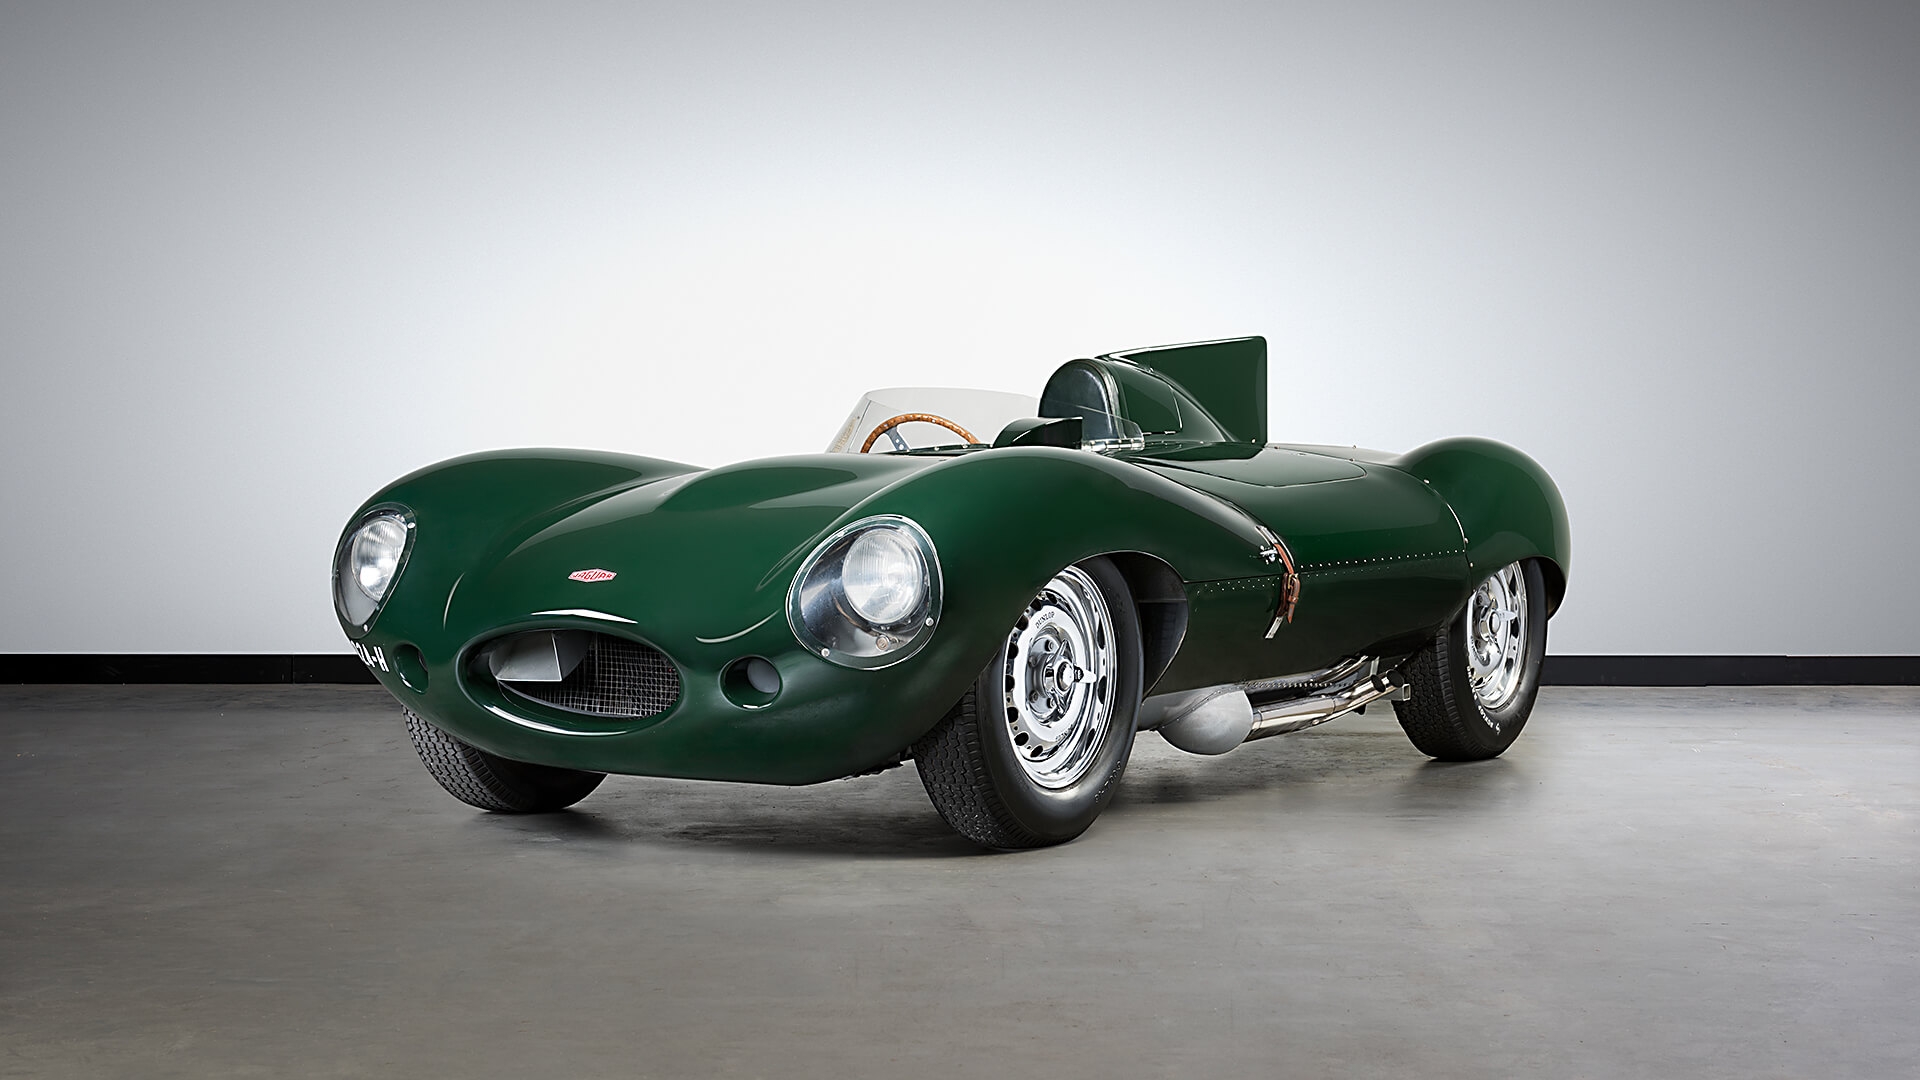 Mossgreen to offer down-under D-type at Motorclassica